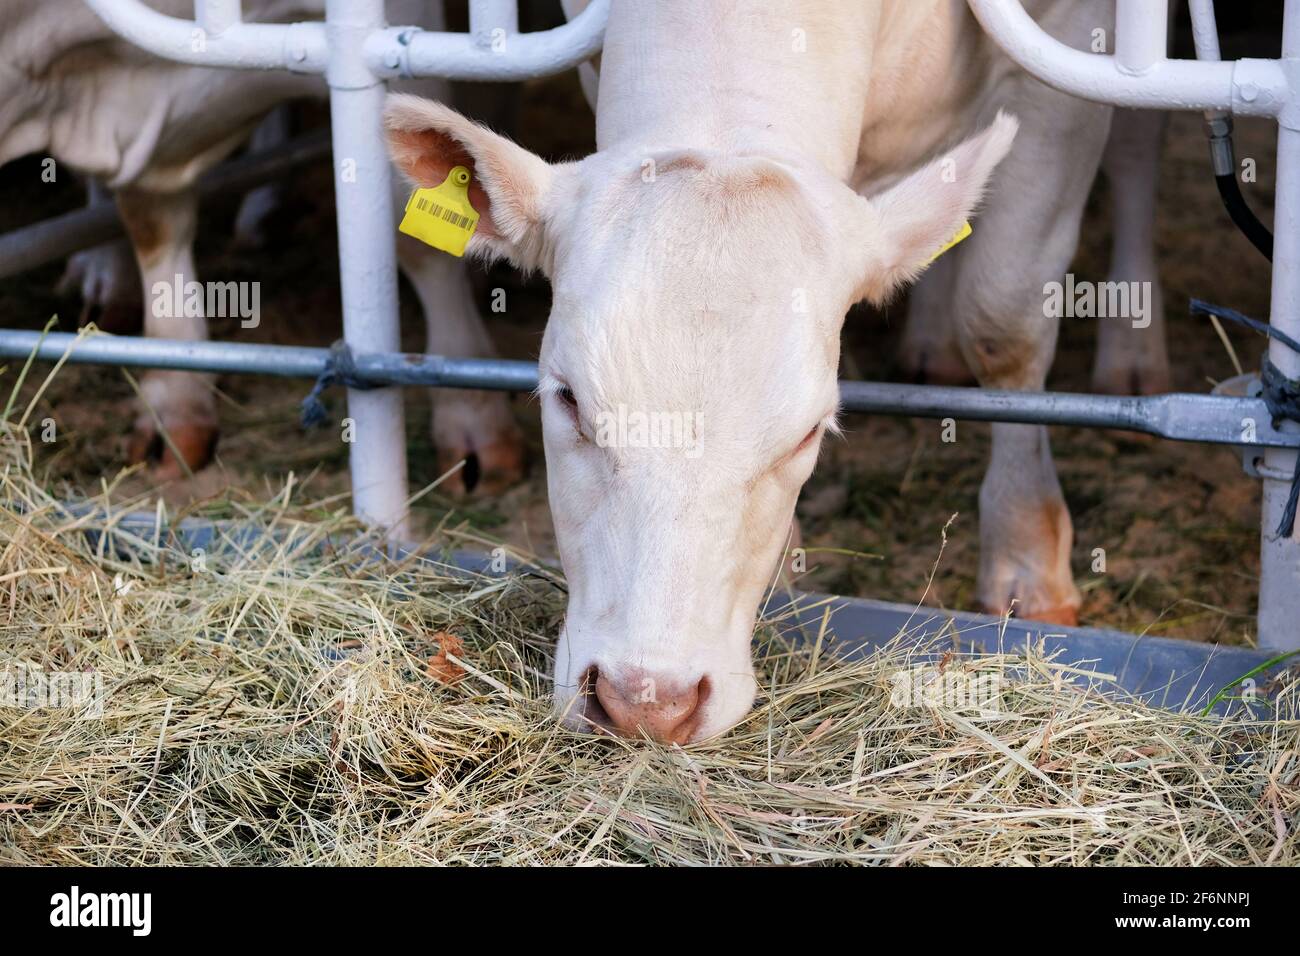 White cow eats hay on dairy farm. Concept of agriculture, farming and livestock. Stock Photo